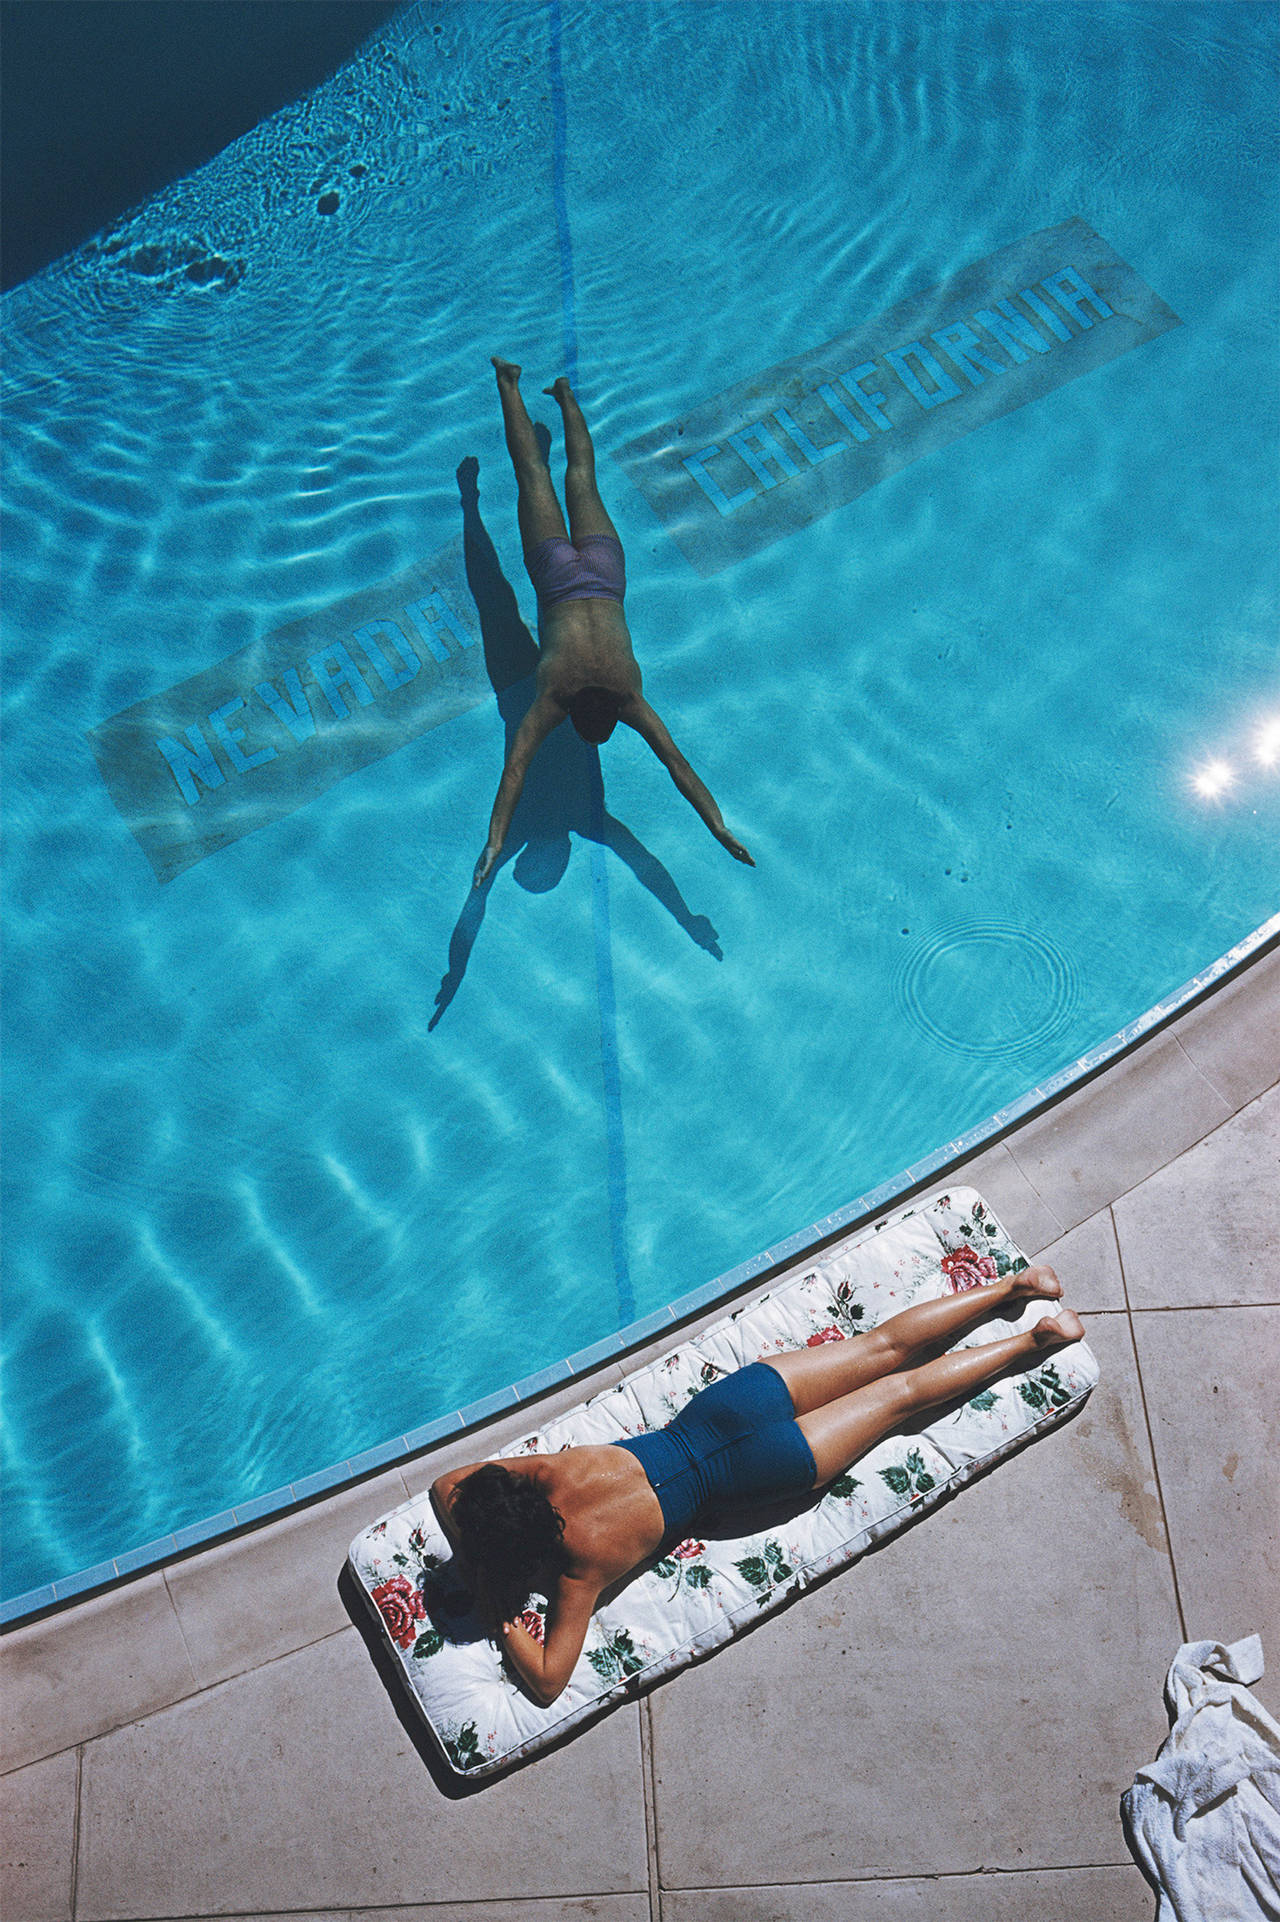 Slim Aarons Color Photograph - Swimmer and Sunbather (Aarons Estate Edition)